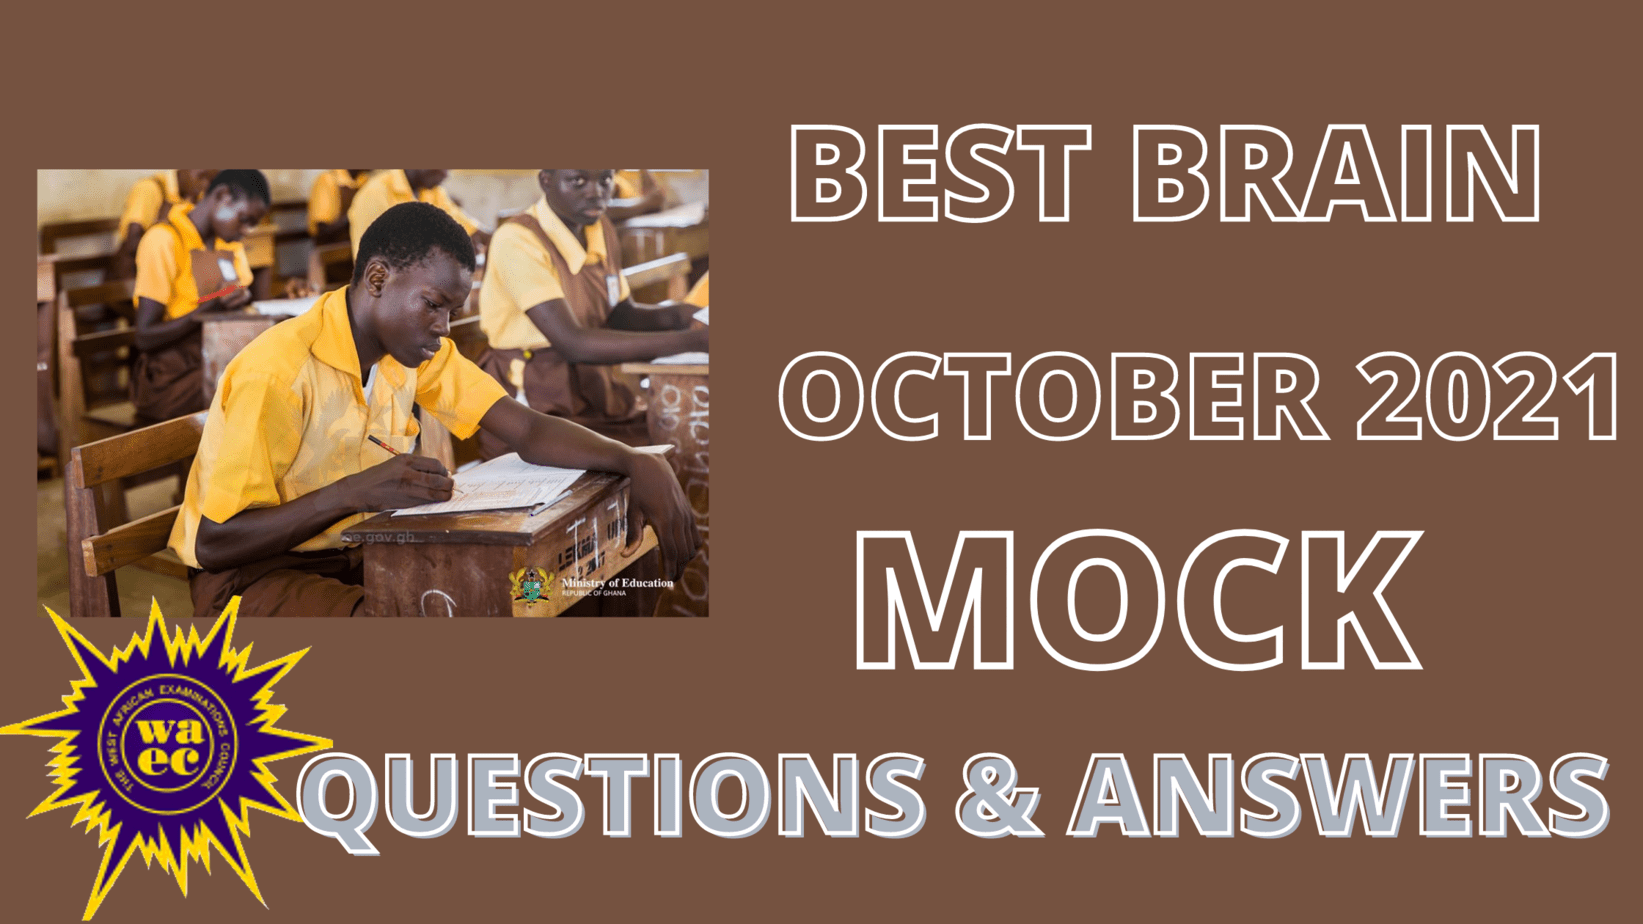 Best Brain October 2021 ICT Mock Past Questions & Answers PDF